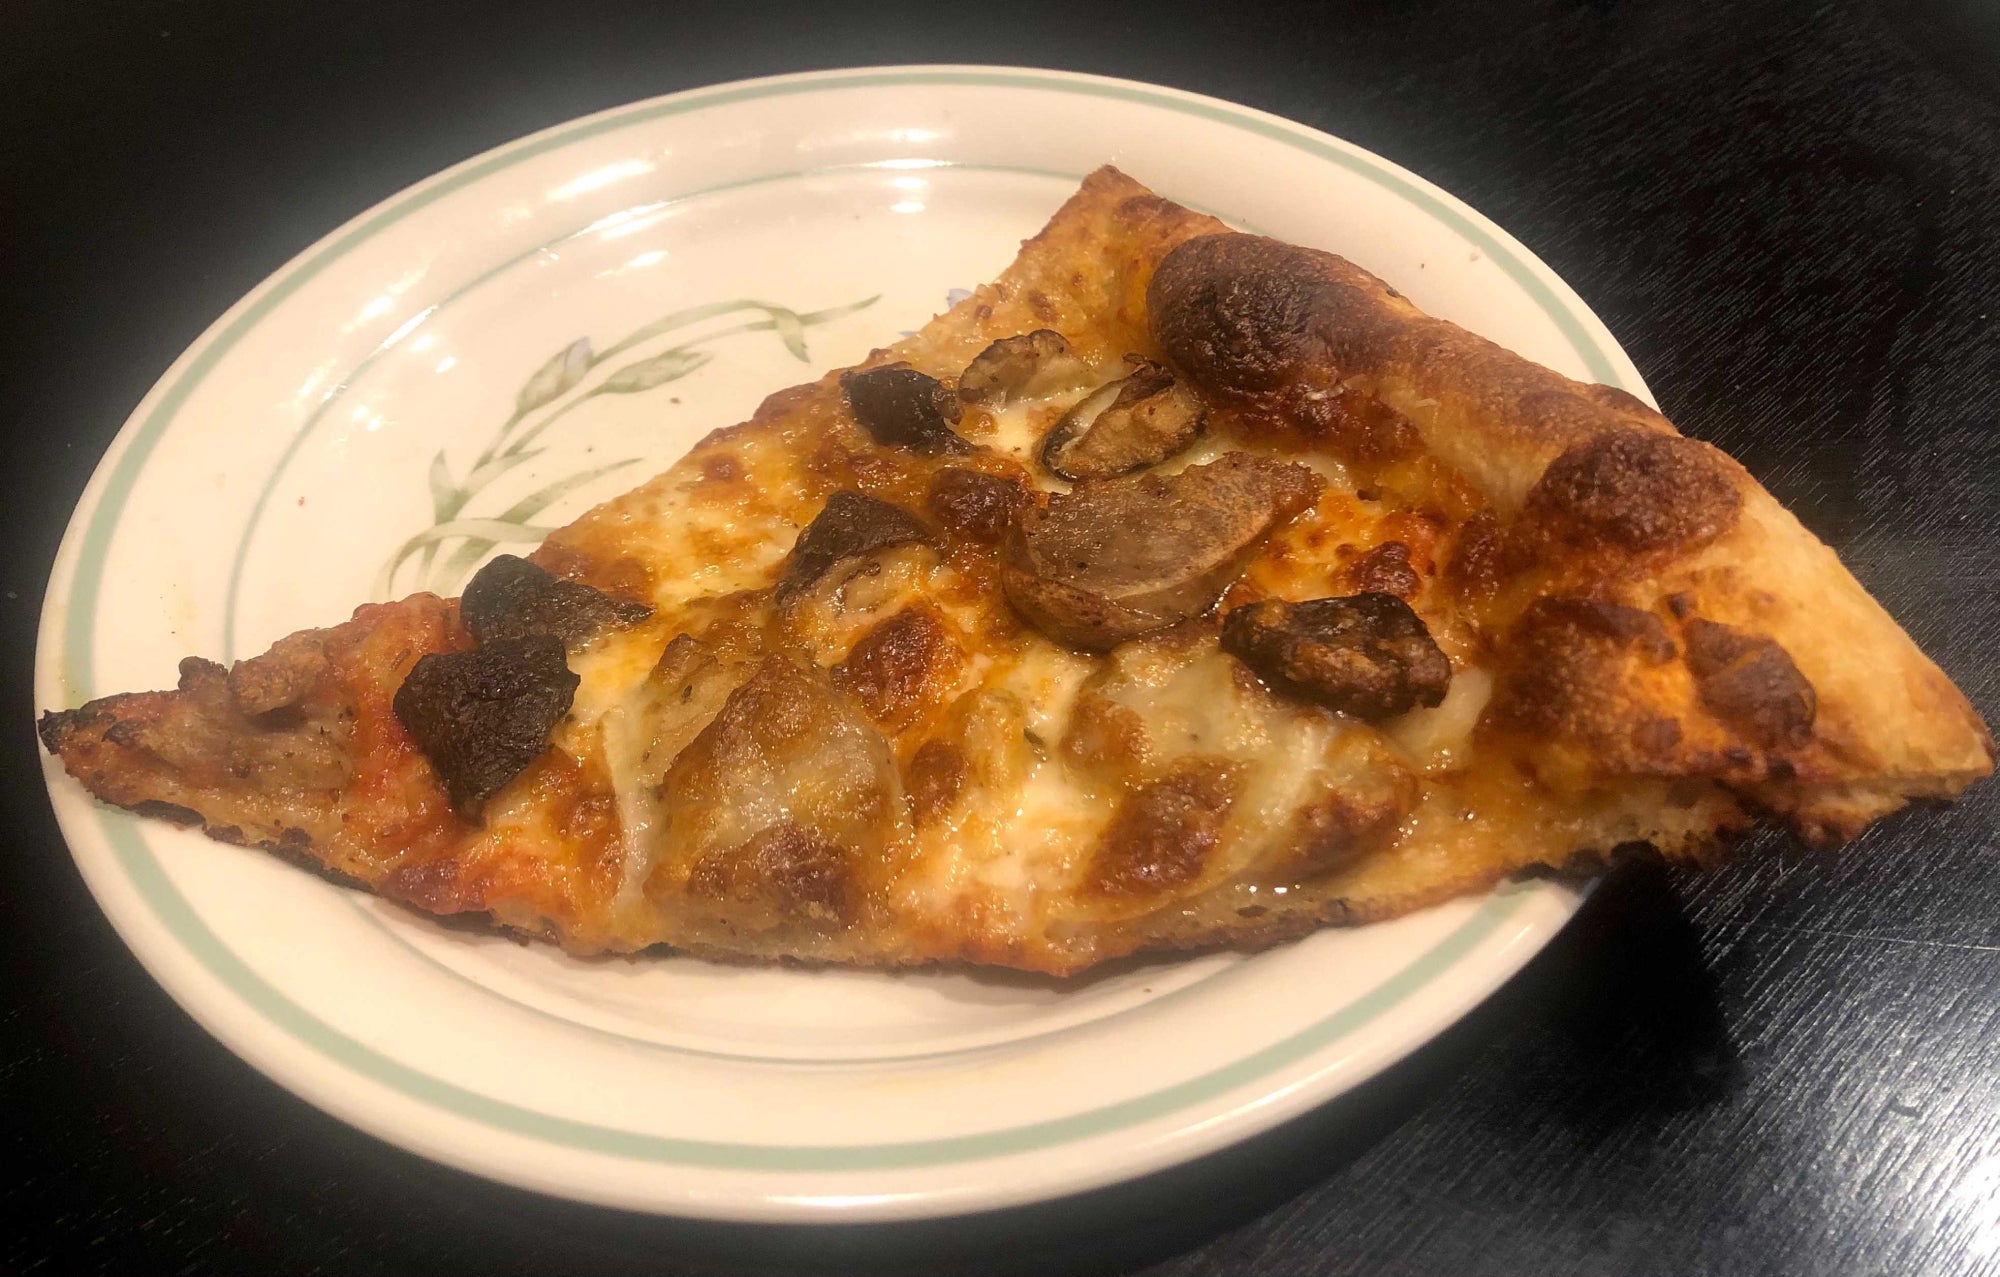 A slice of sausage, mushroom, and onion pizza that someone chose to reheat in an air fryer.